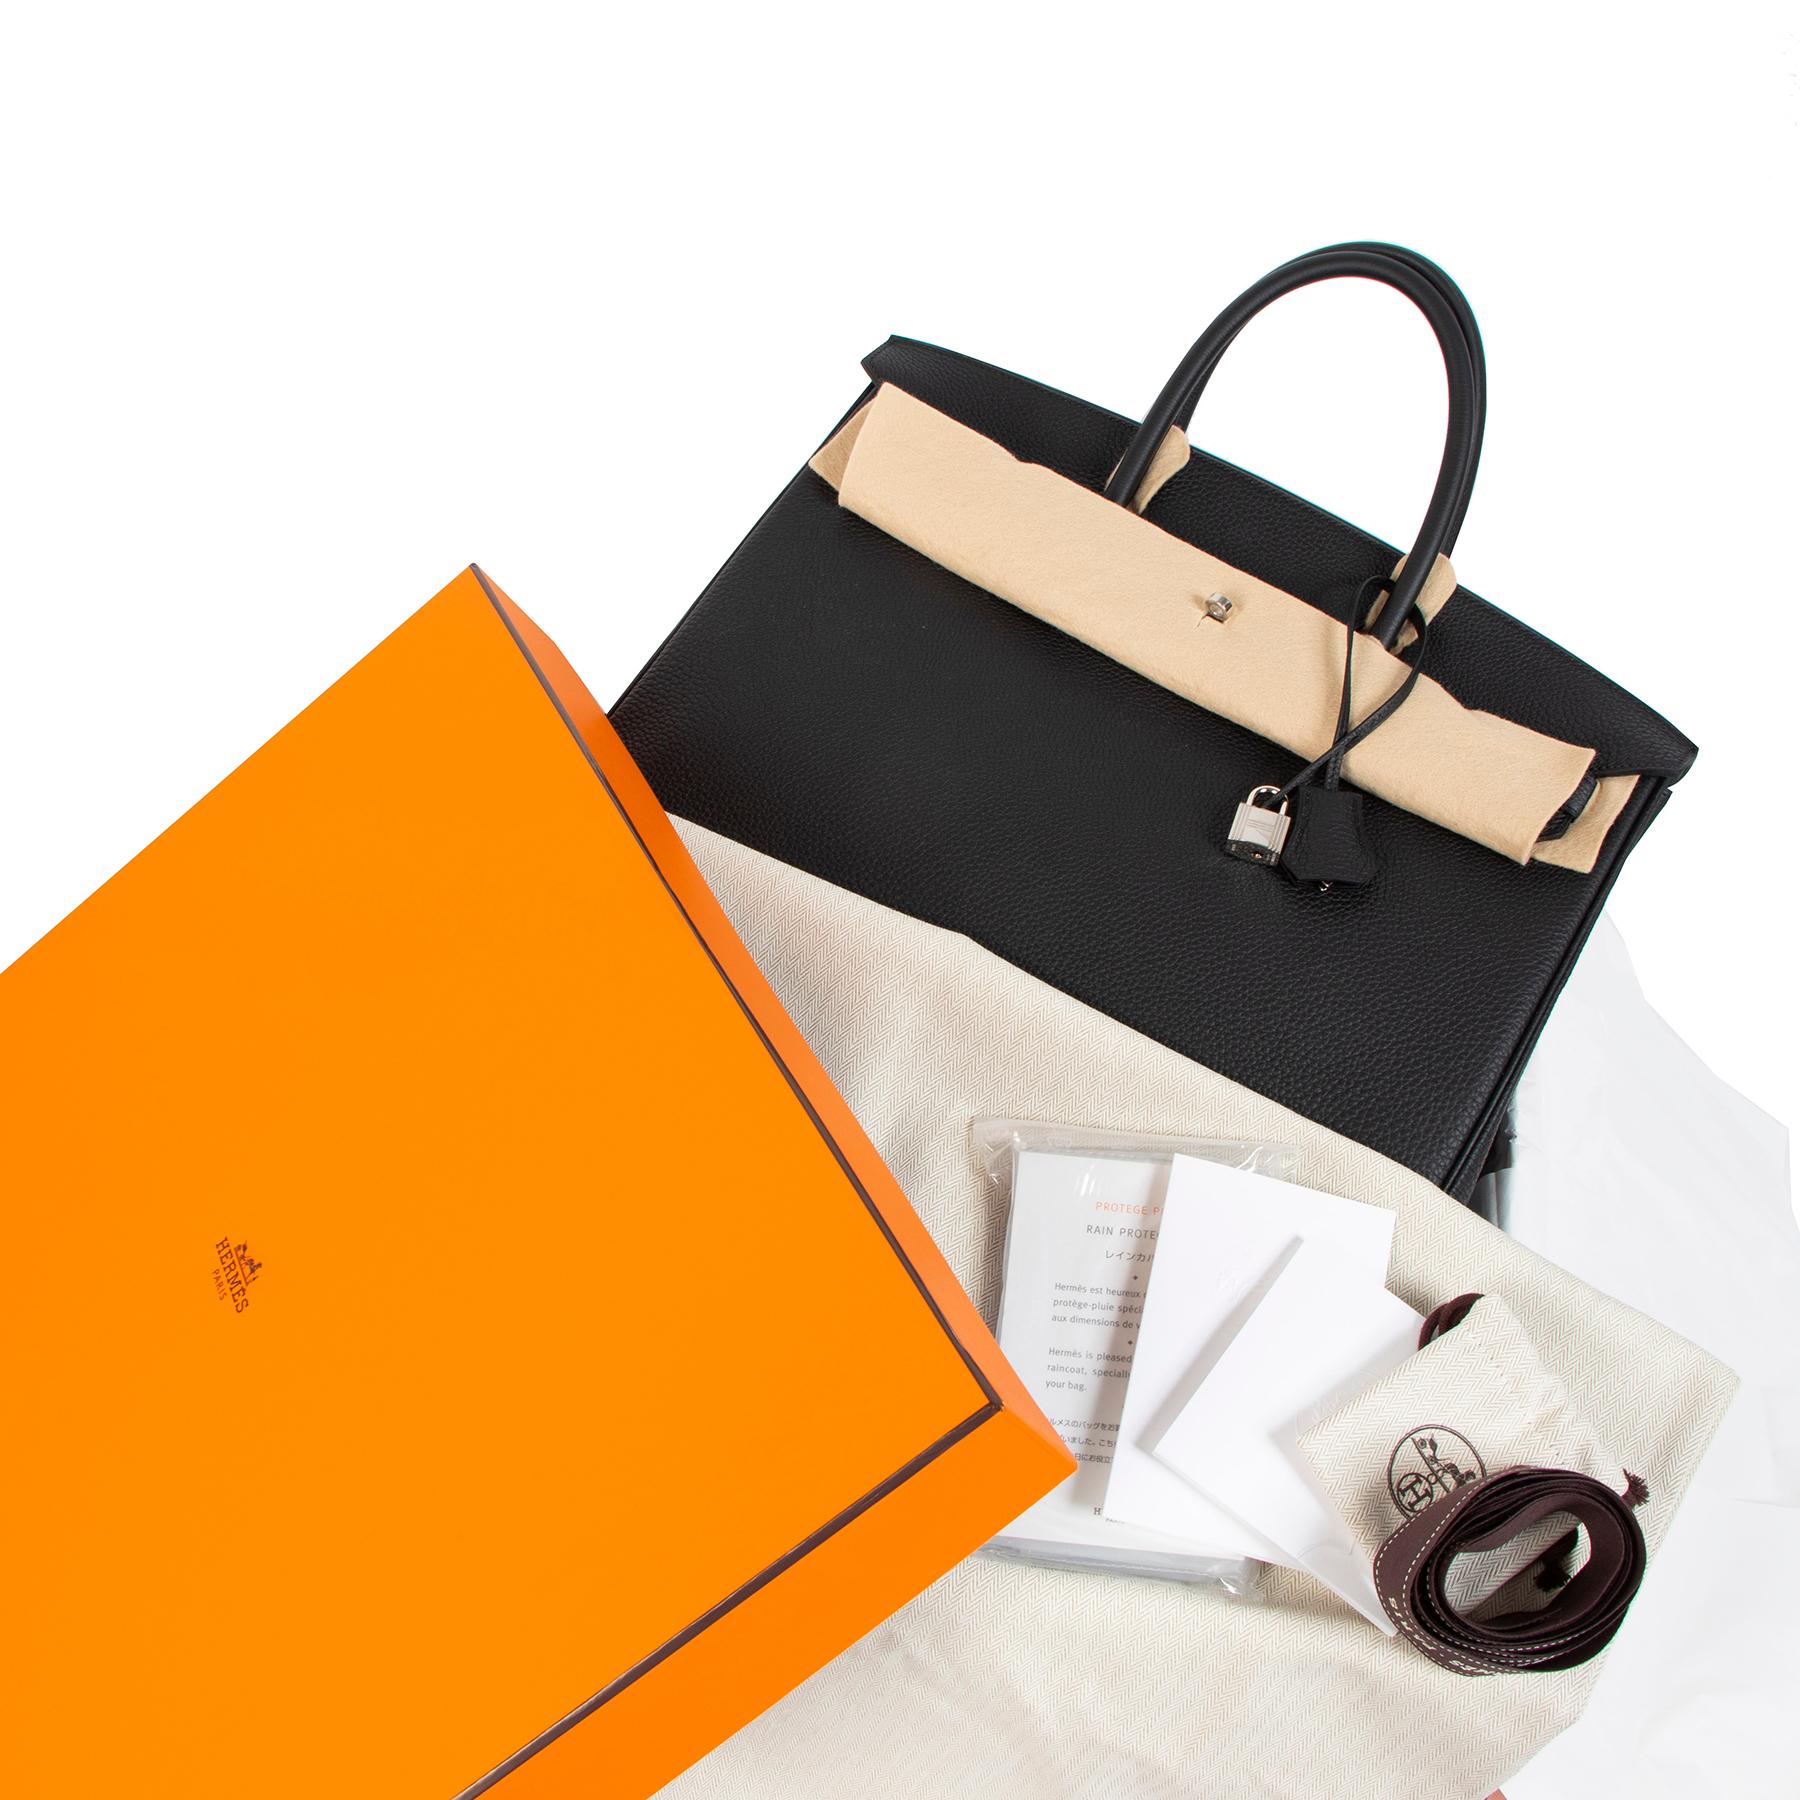 Brand New

Hermès Birkin 40 Black Togo PHW

The handbag of all handbags one of the most loved bags in the world. 
This -inspired by Jane Birkin- bag is made out of the highest scratch-resistant quality leather.

Togo holds its shape well , many